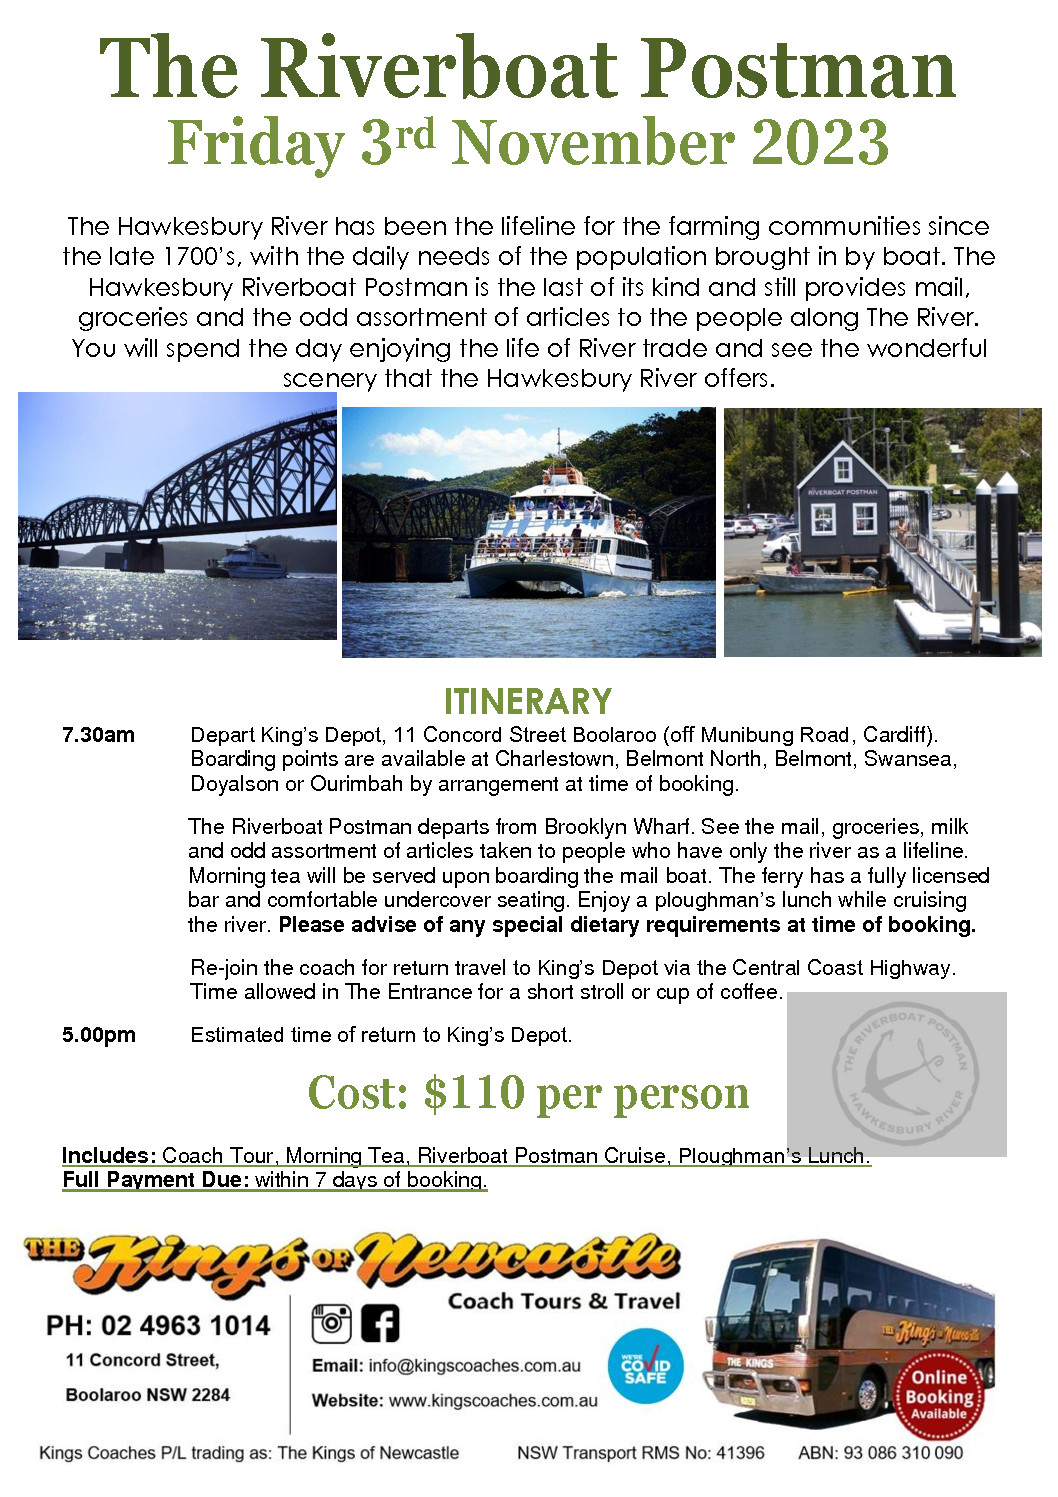 the riverboat postman tickets 2023